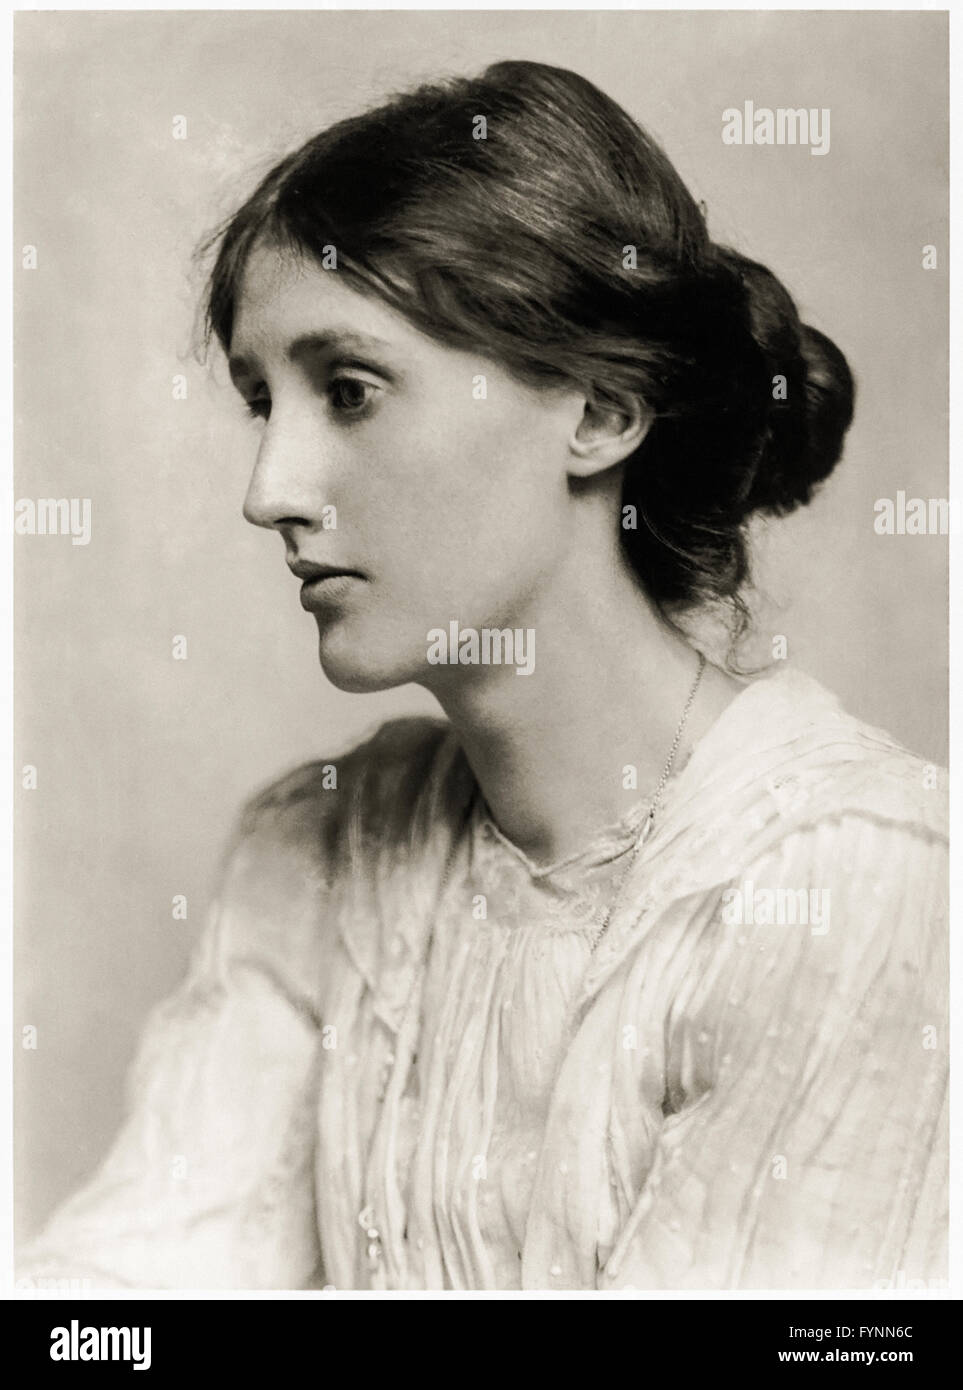 Virginia Woolf (1882-1941) English writer and member of the Bloomsbury Group. Studio photograph taken by George Charles Beresford (1864-1938) in 1902. Stock Photo